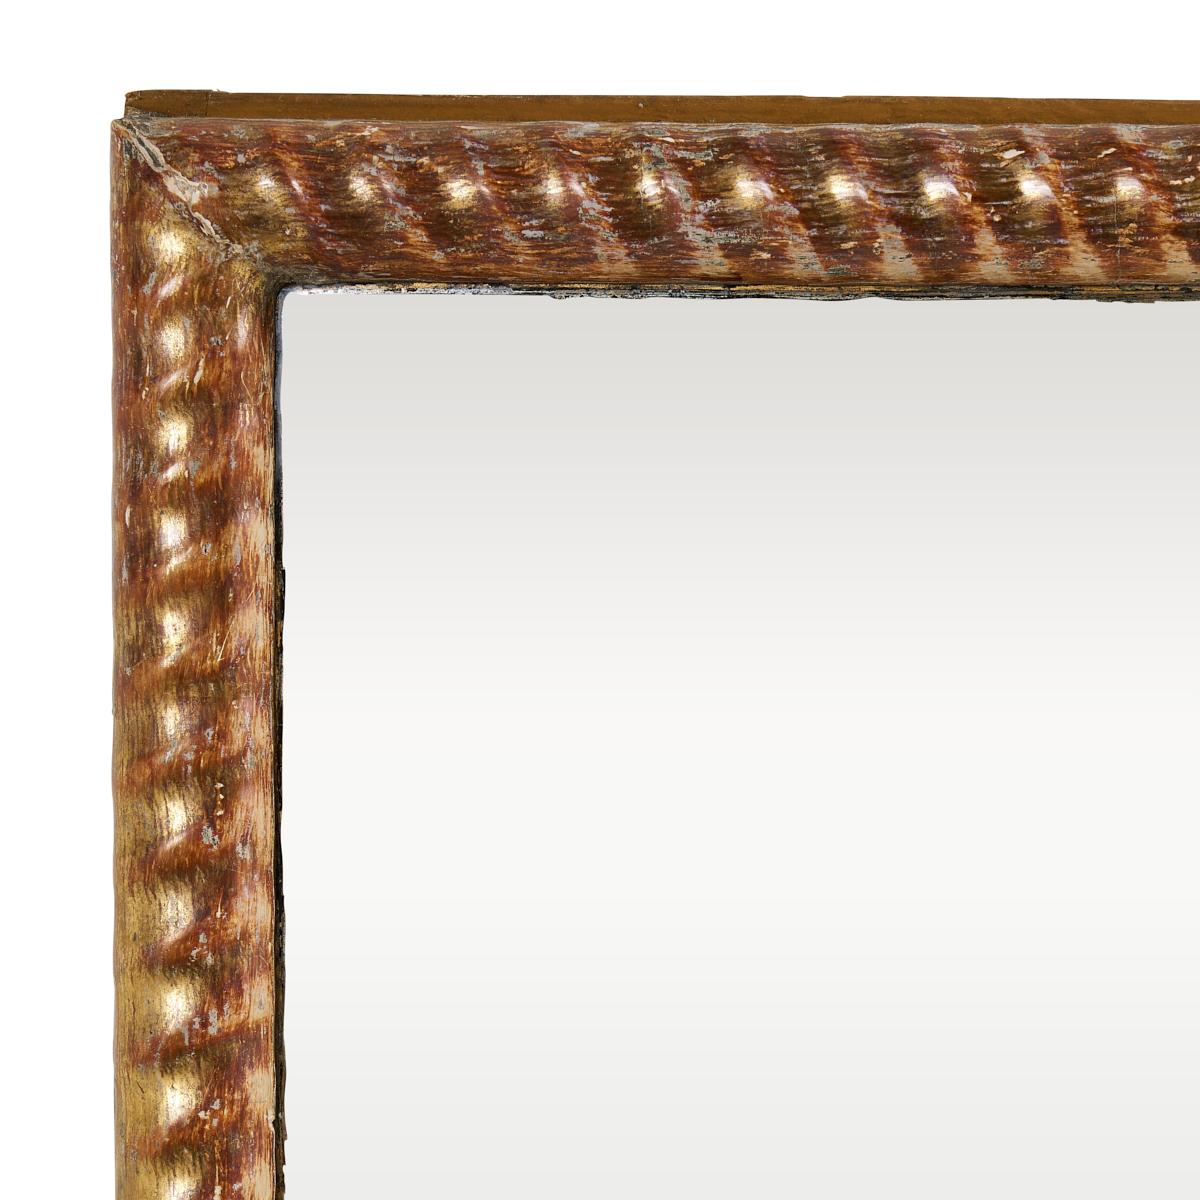 This beautiful 19th-century mirror was discovered in France. Exceedingly simple and extremely refined, it has a delicate, hand-carved rope frame with its original gilded finish. Perfect for an entry hall.